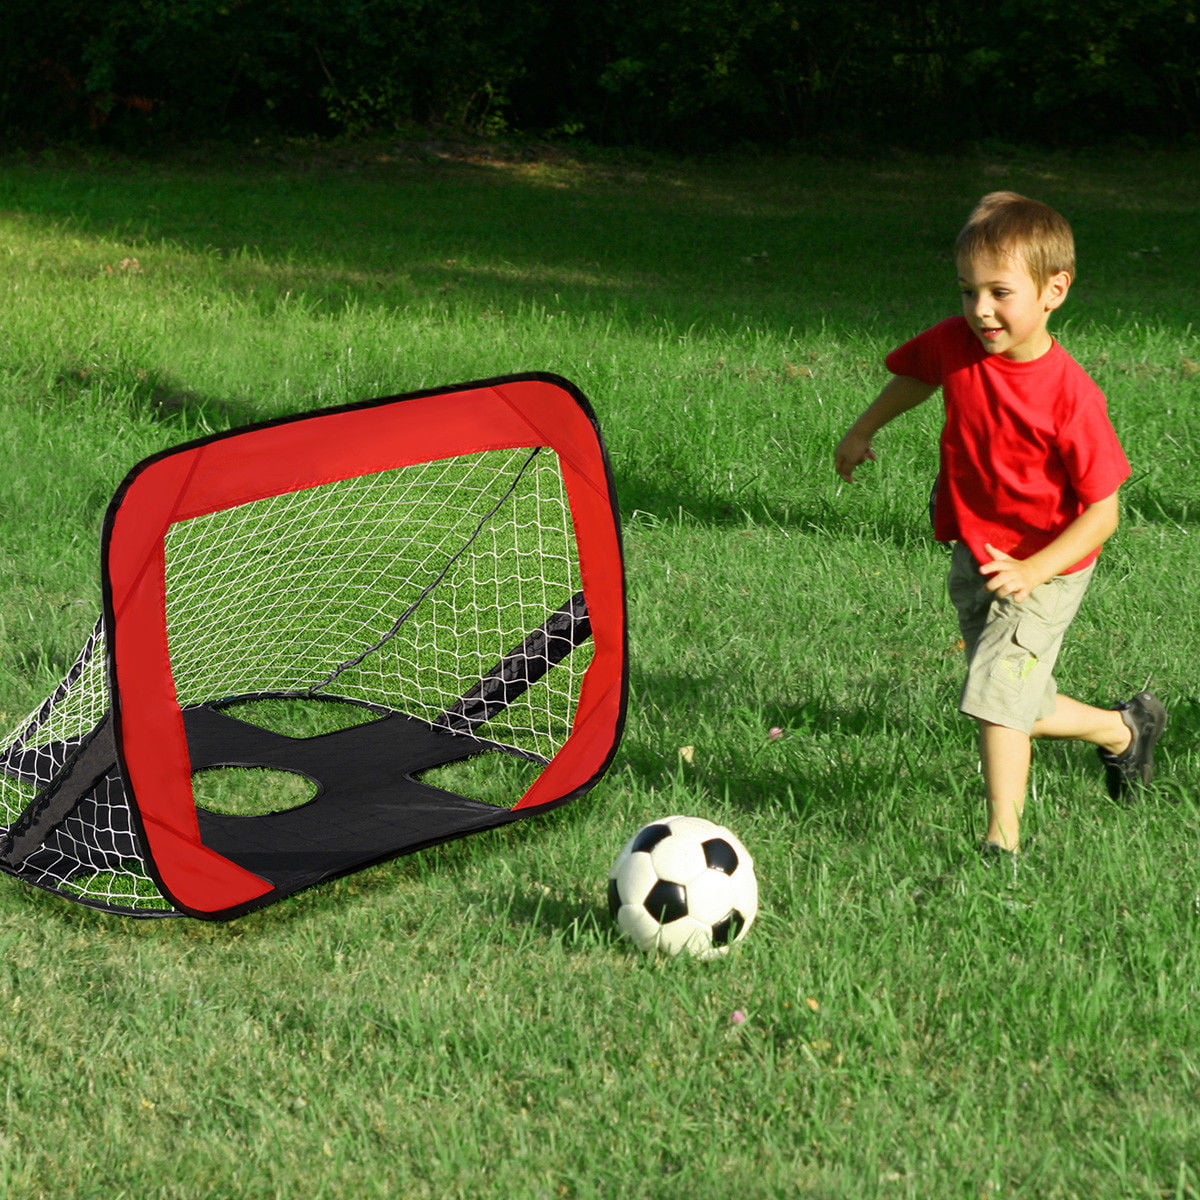 Sizet Mini Foldable Pop Up Soccer Goal Nets for Kids Portable Kids Soccer Goals with Travel Carrying Bag Kids Soccer Fun Playing Nets